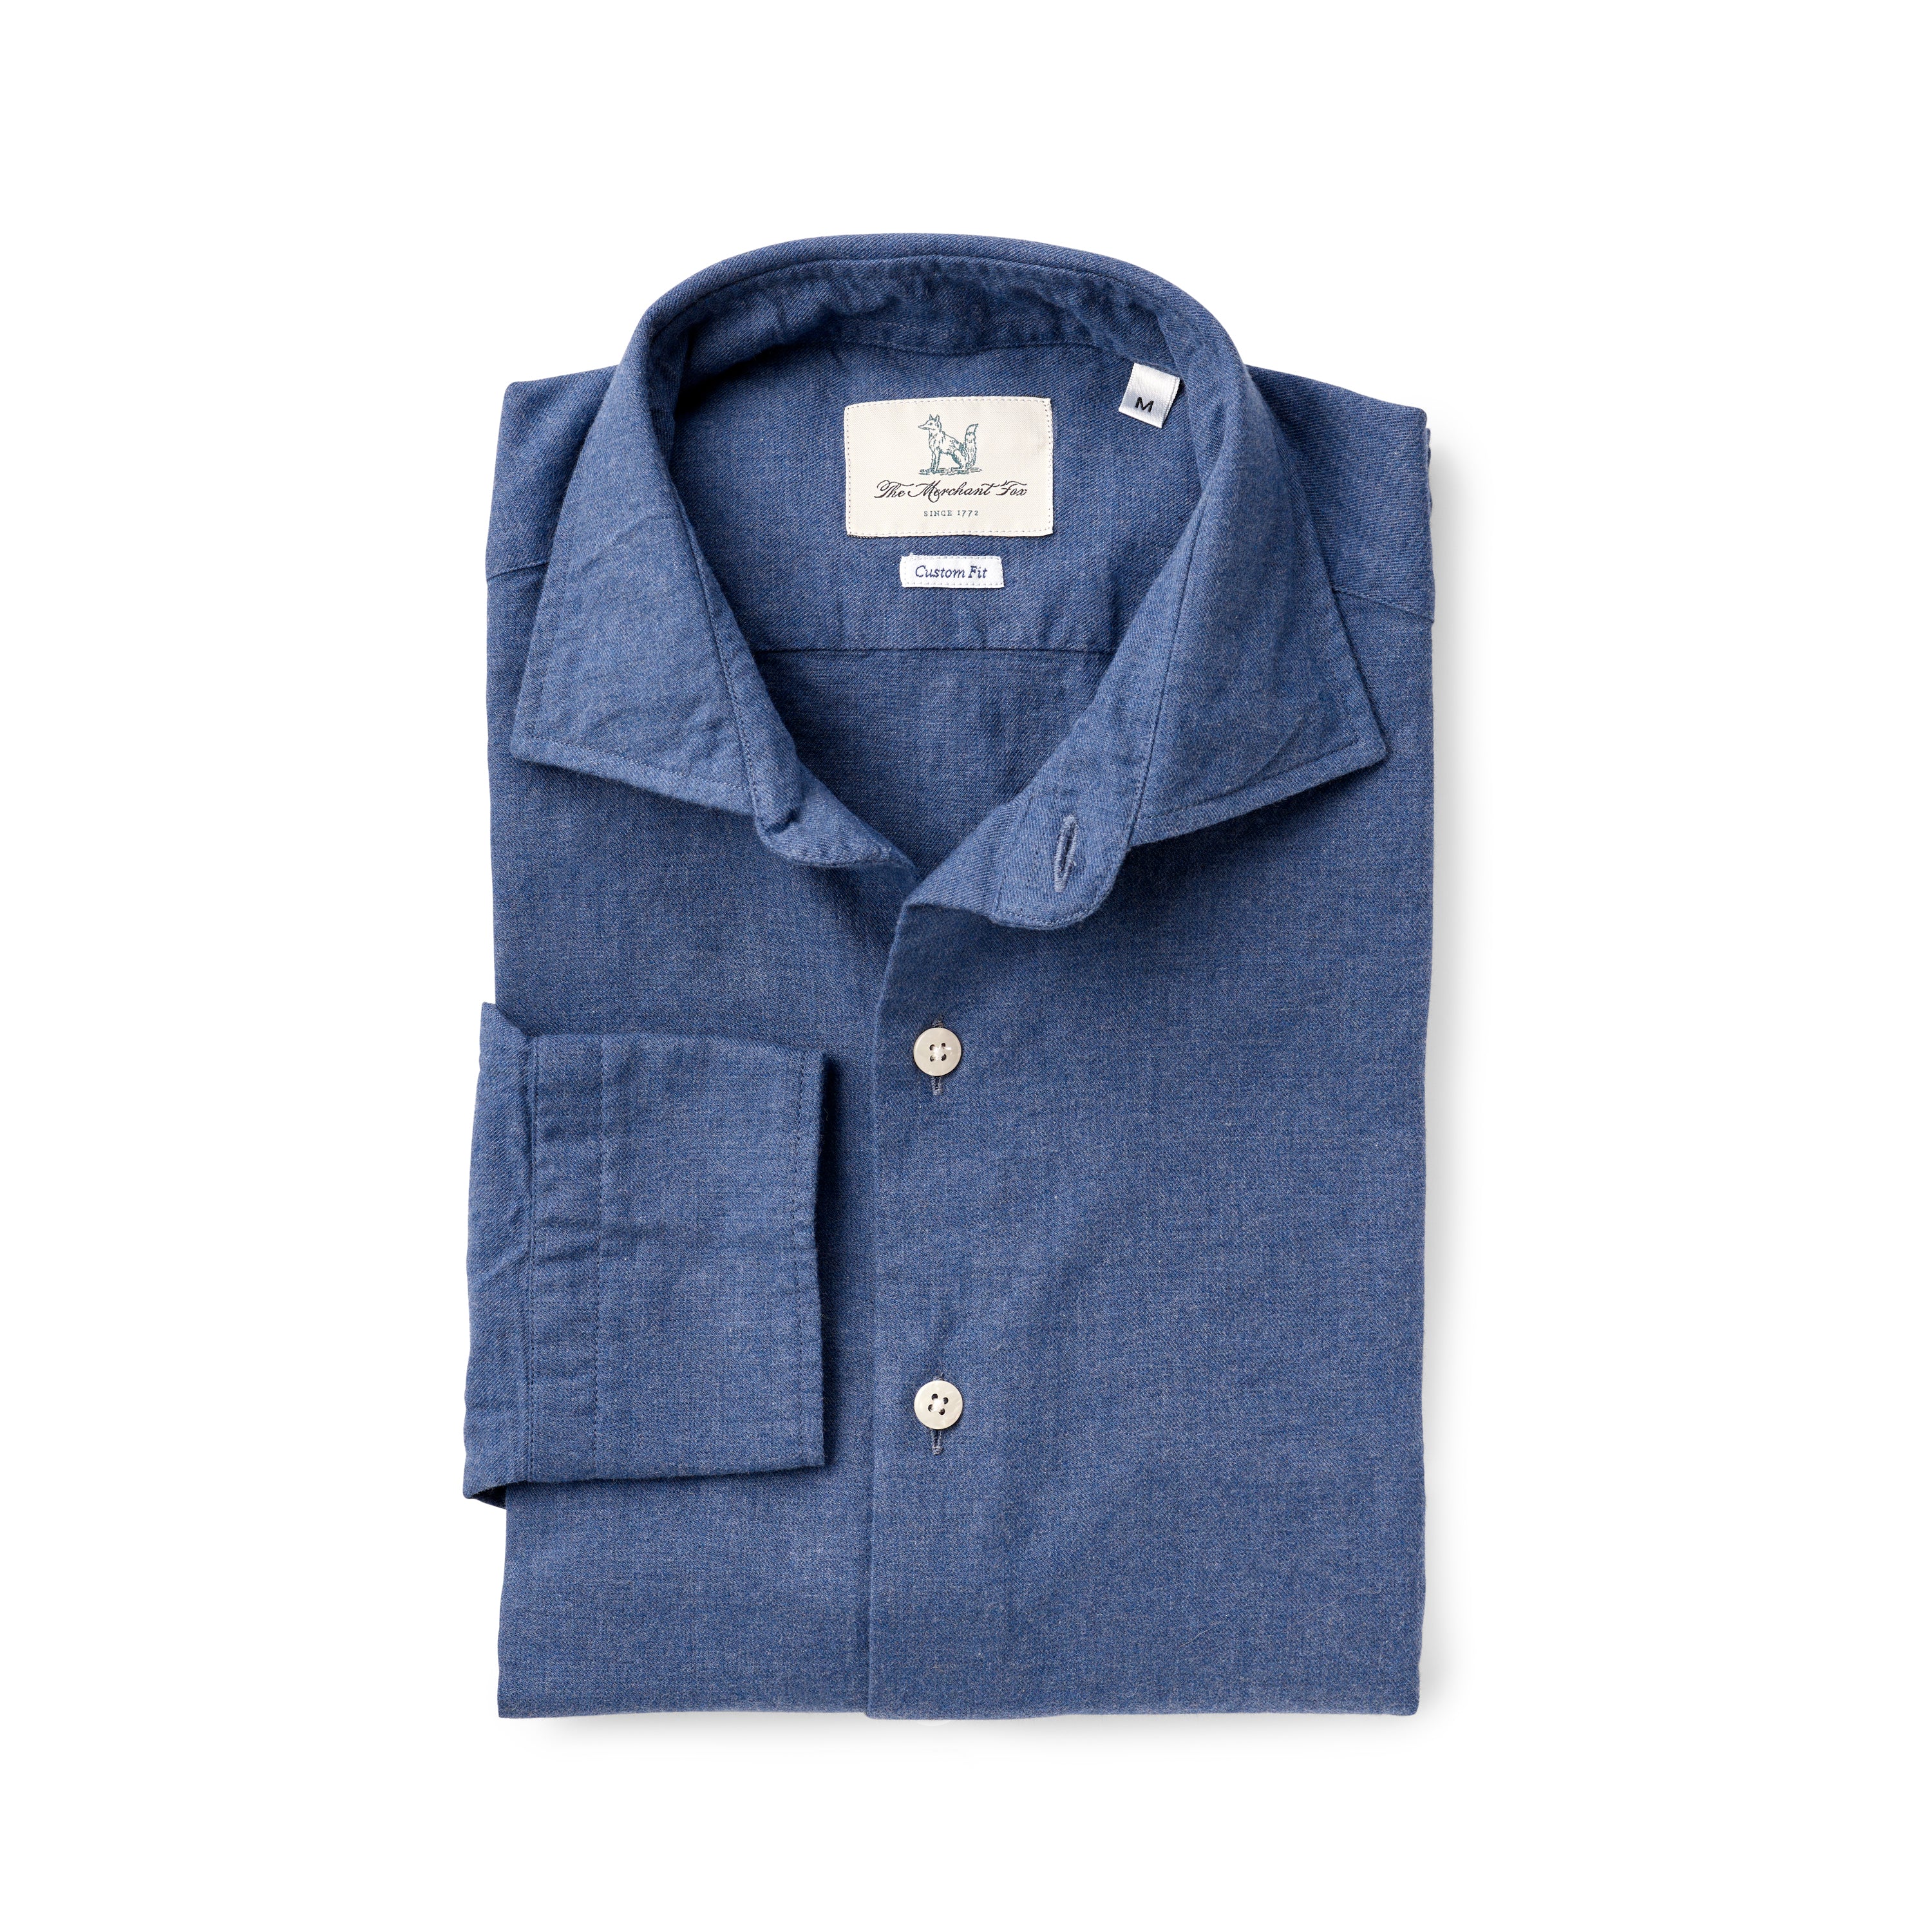 Brushed cotton spread collar shirt in Navy